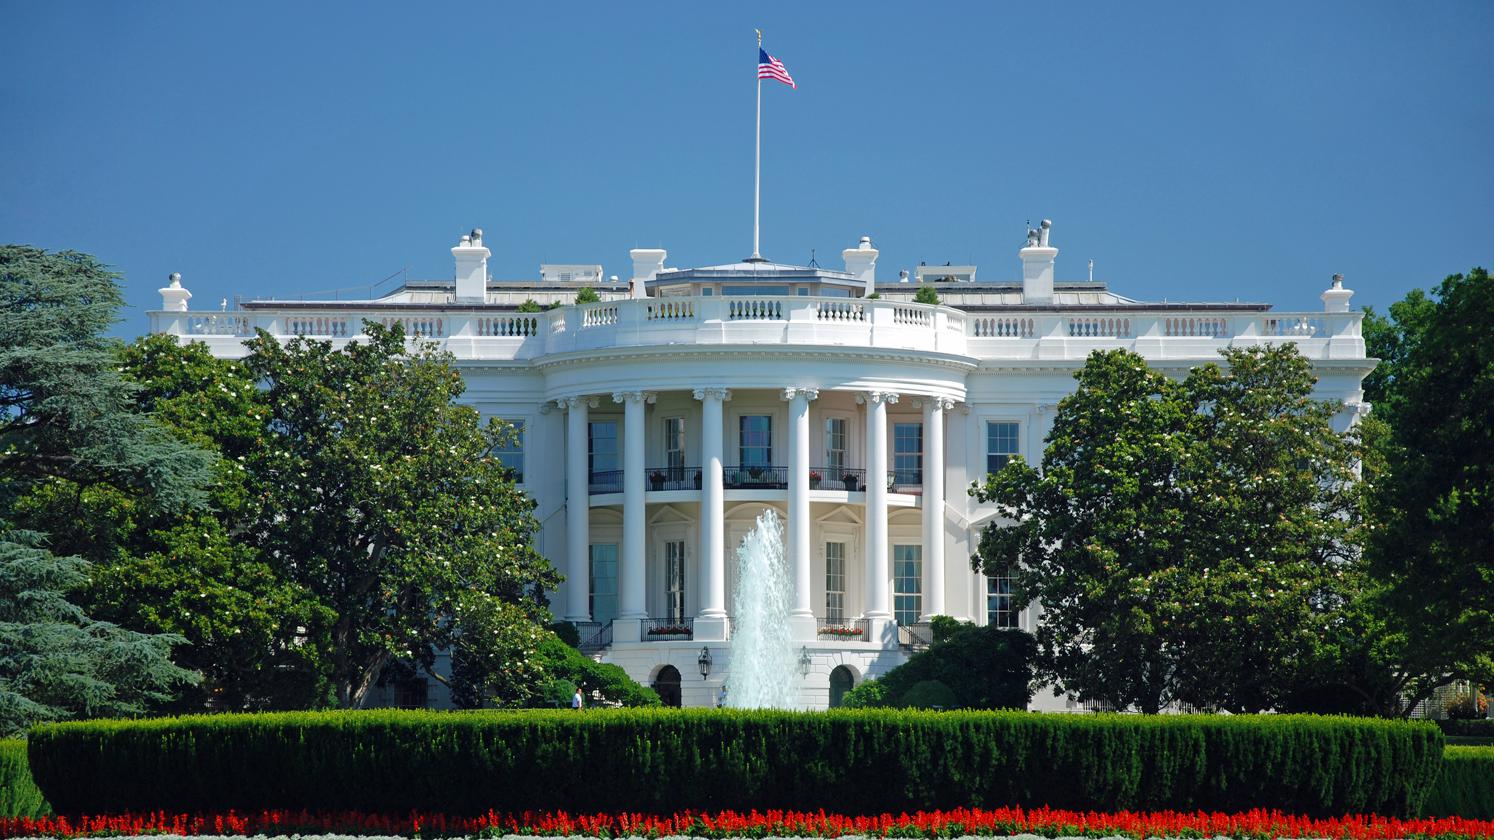 The front of the White House.